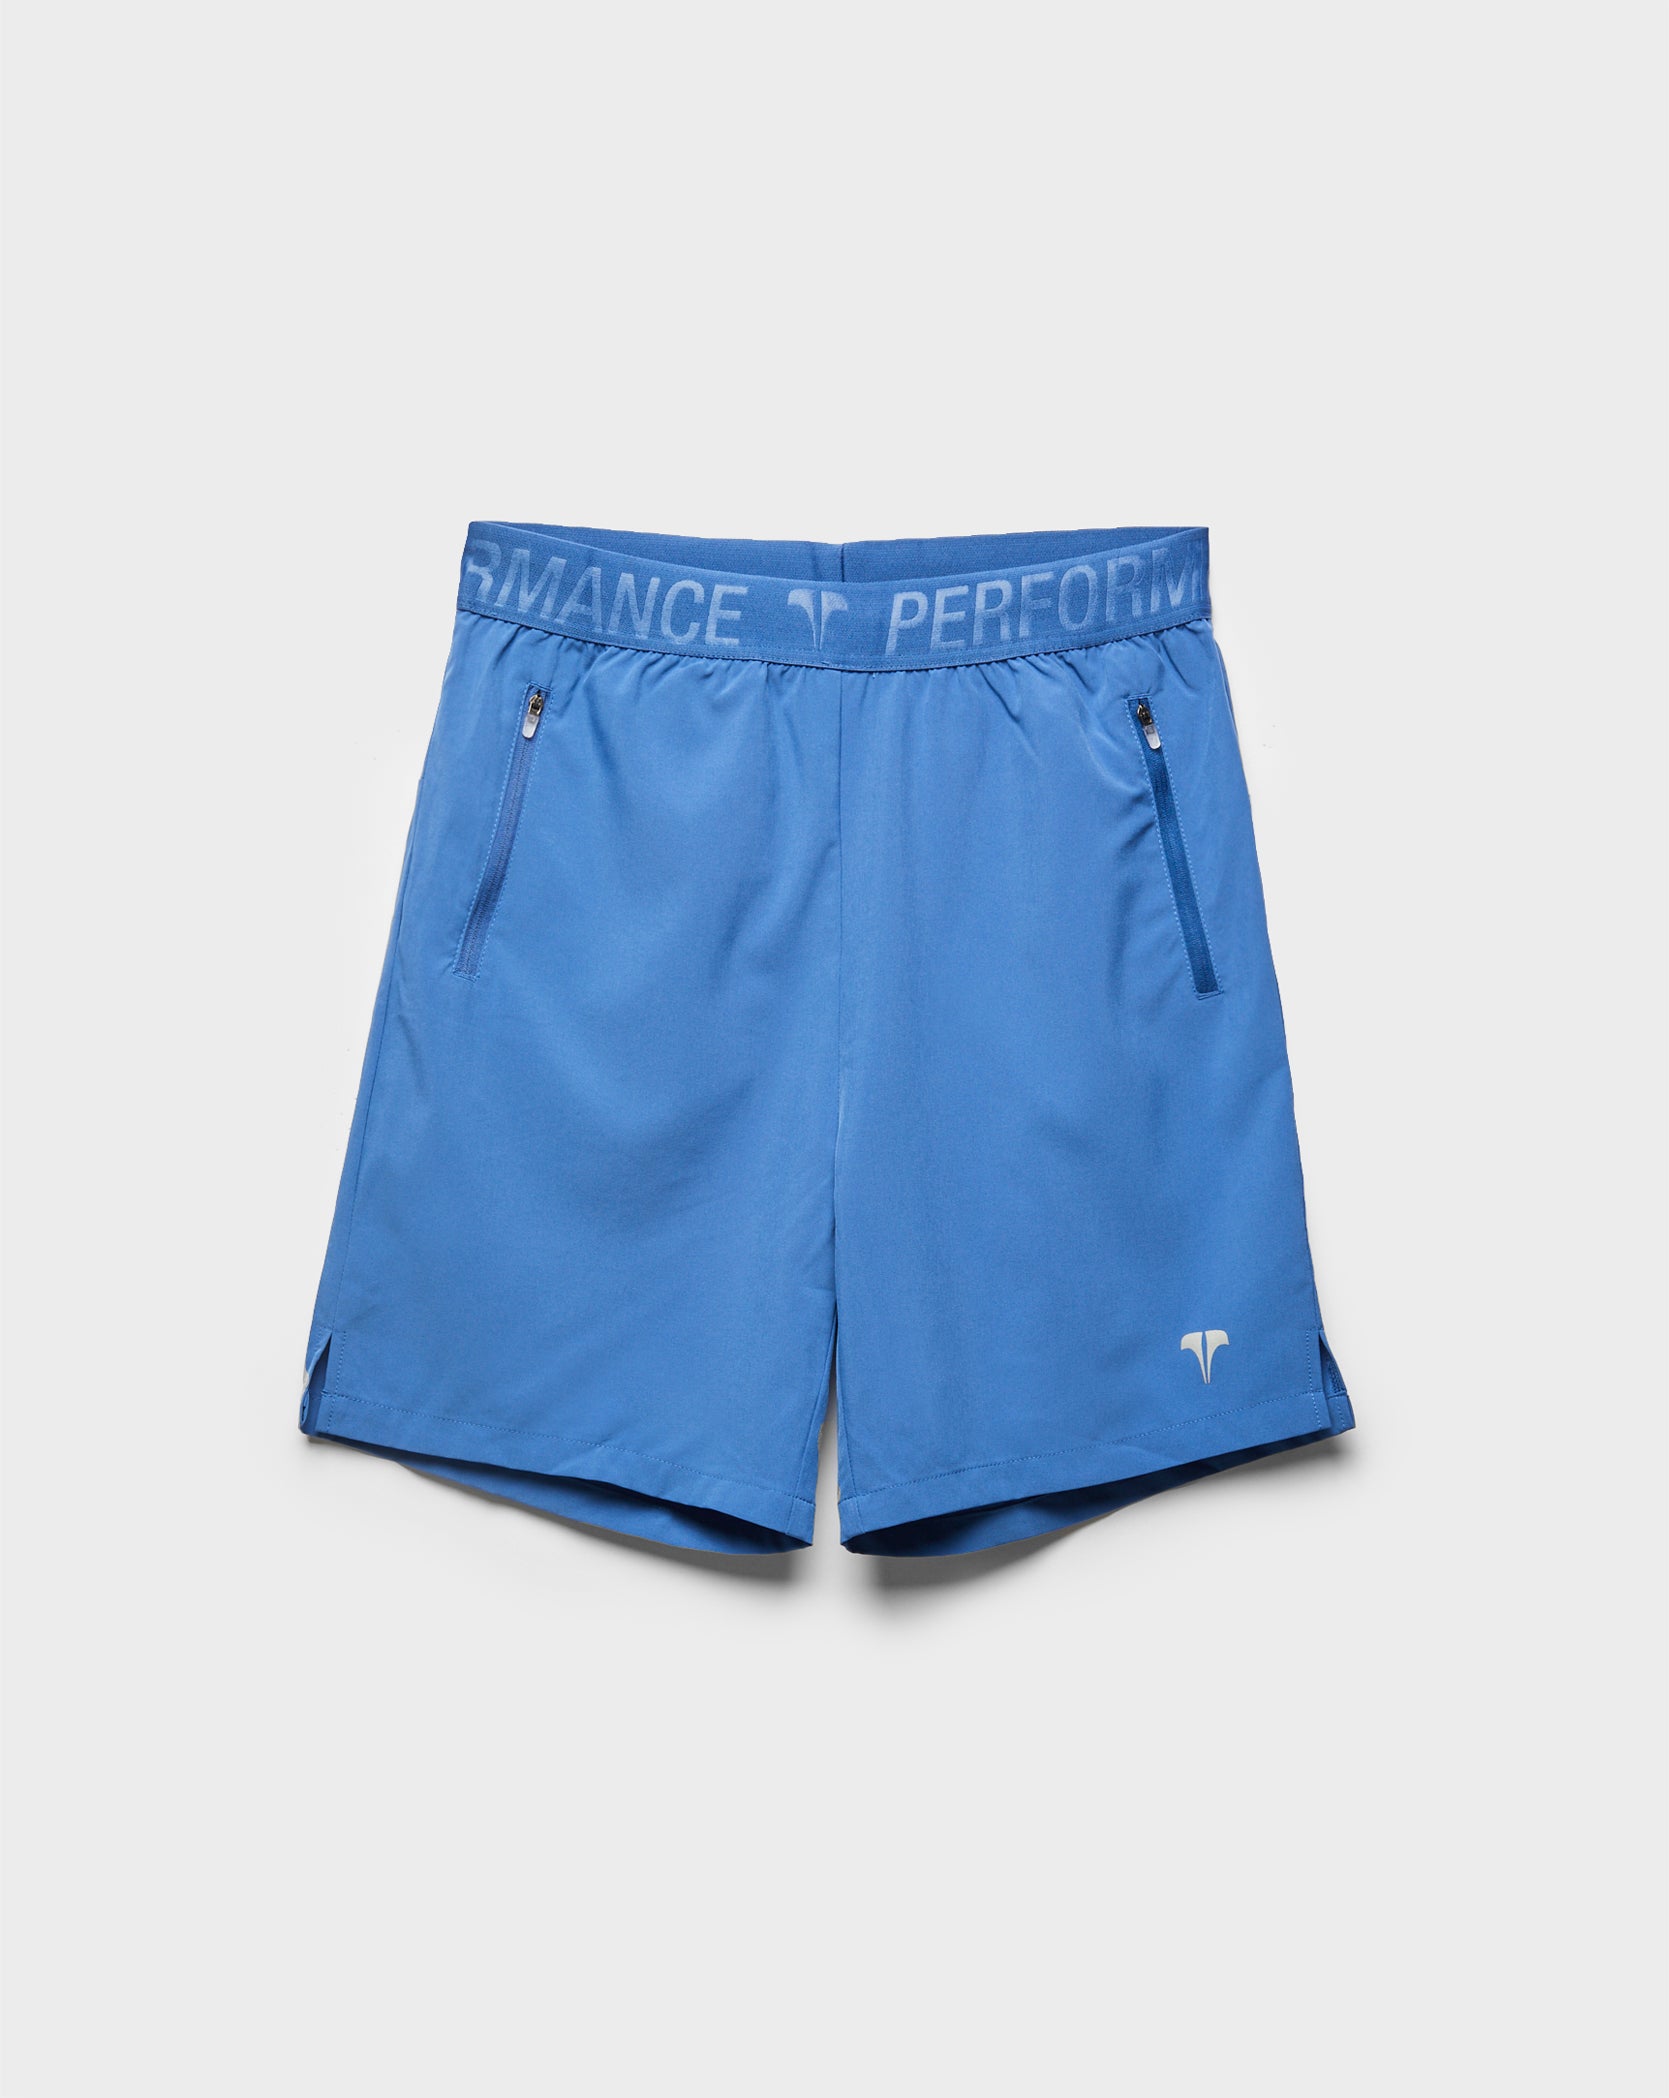 Twinzz active blue shorts front